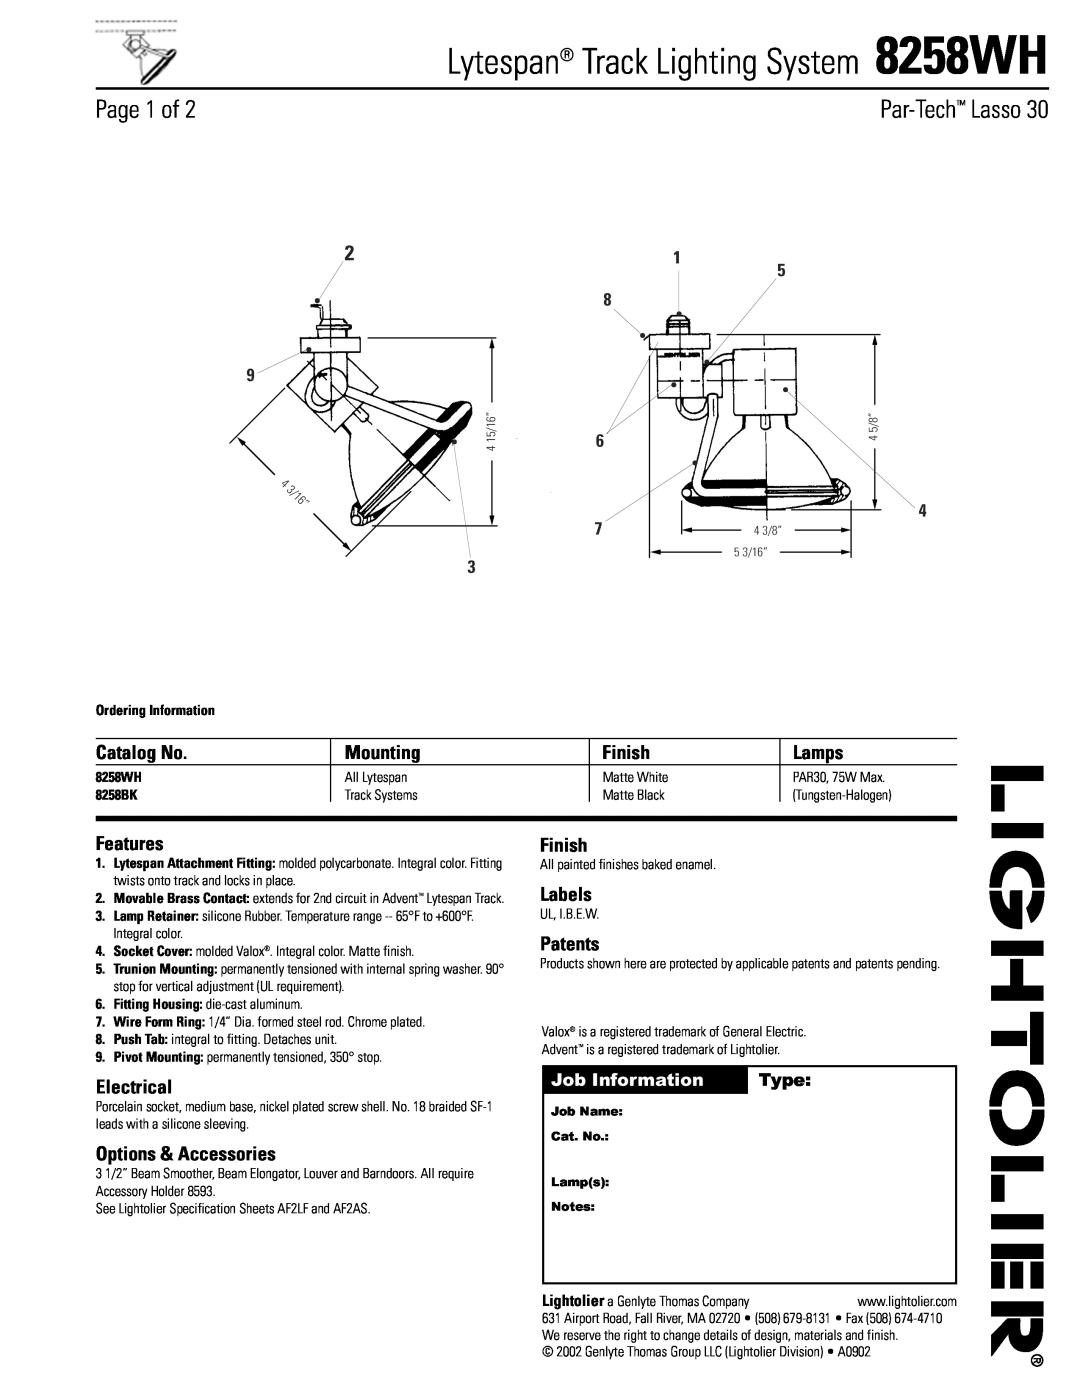 Lightolier specifications Lytespan Track Lighting System 8258WH, Page 1 of, Catalog No, Mounting, Finish, Lamps, Labels 